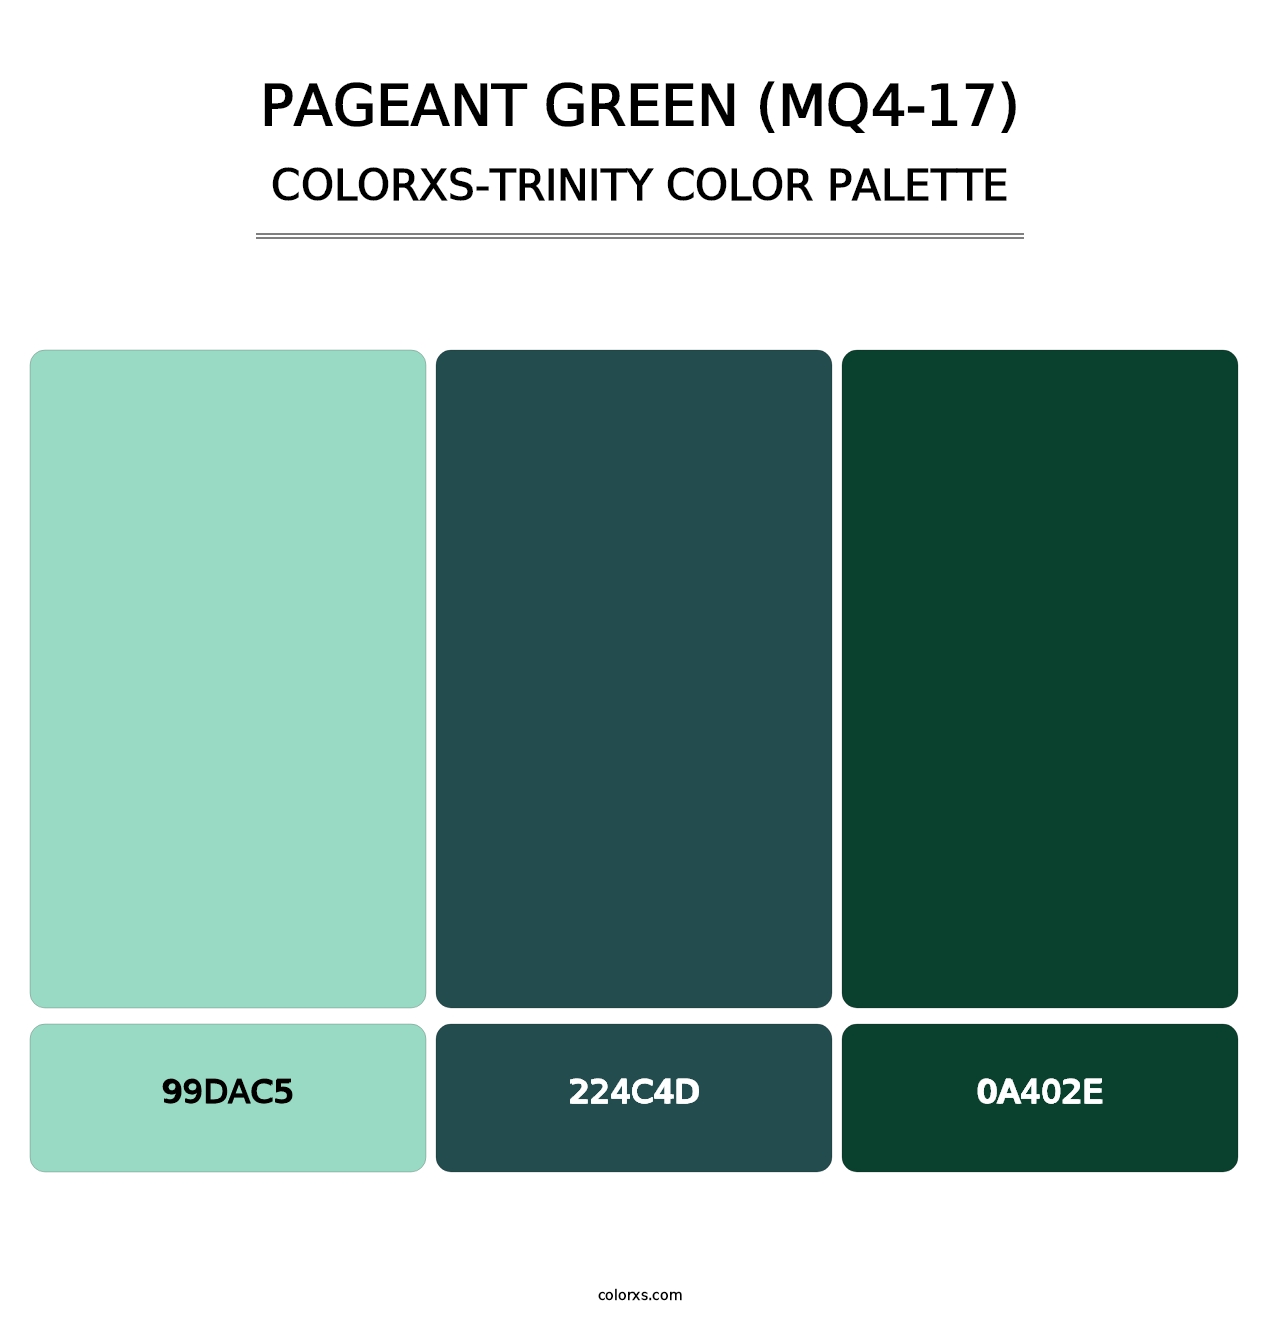 Pageant Green (MQ4-17) - Colorxs Trinity Palette